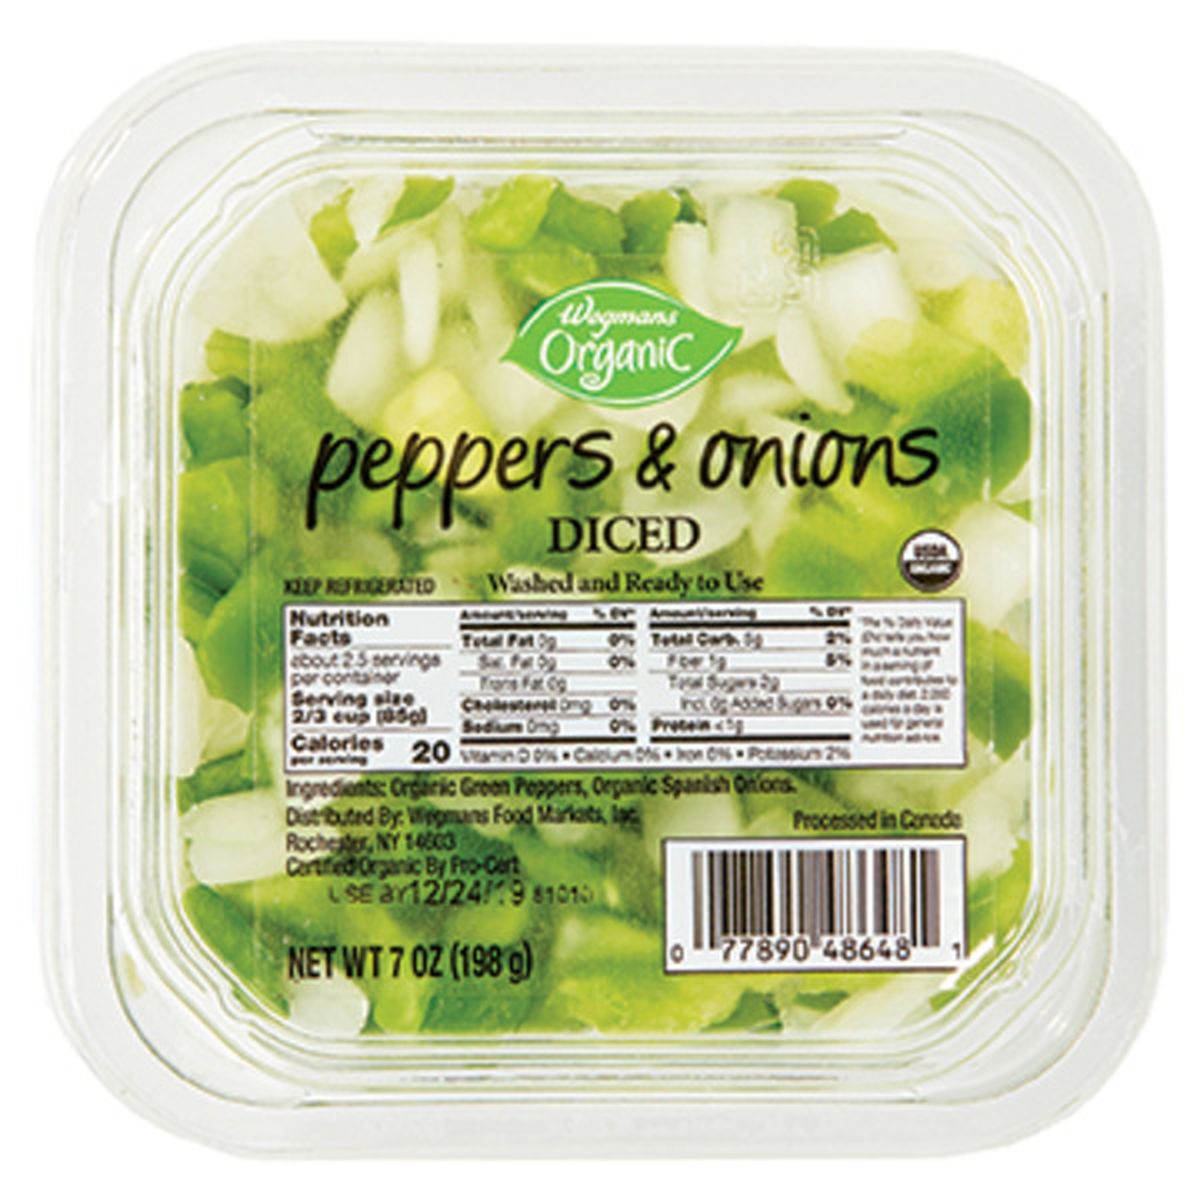 Calories in Wegmans Organic Peppers & Onions Diced